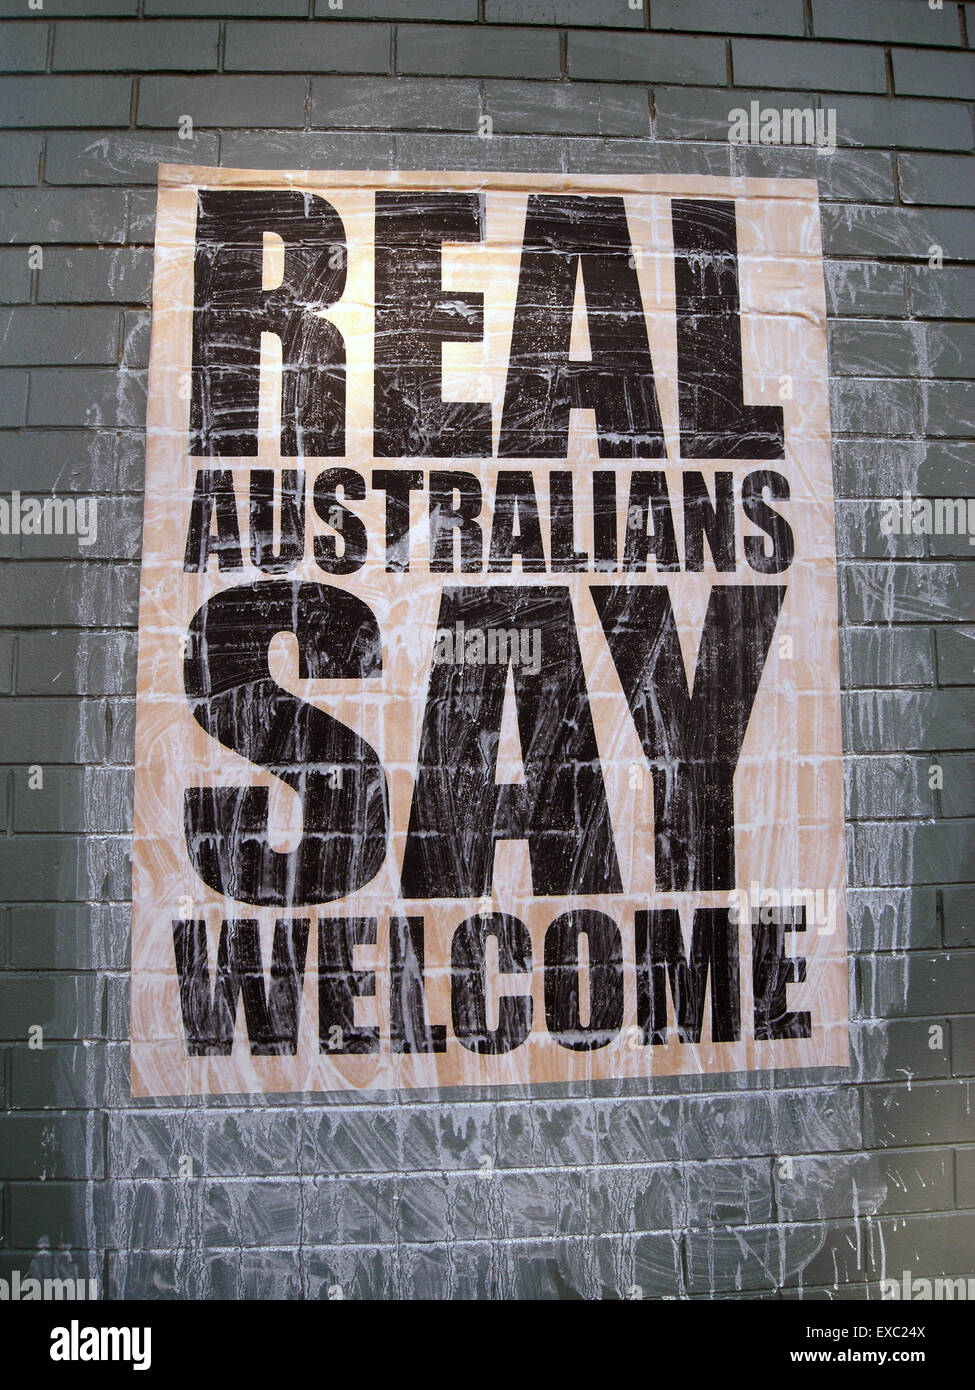 Perth, Australia. 11th July, 2015. As a nation built on immigration and multiculturalism, not all Australians support their government's hardline stance against asylum seekers: grass-roots campaigns are cropping up all over the country advocating for a more humanitarian approach to refugees. REAL AUSTRALIANS SAY WELCOME posters recently originated in Melbourne, Victoria, but are now starting to appear on city walls 3500km away in Perth, Western Australia (pictured). Credit:  Suzanne Long/Alamy Live News Stock Photo